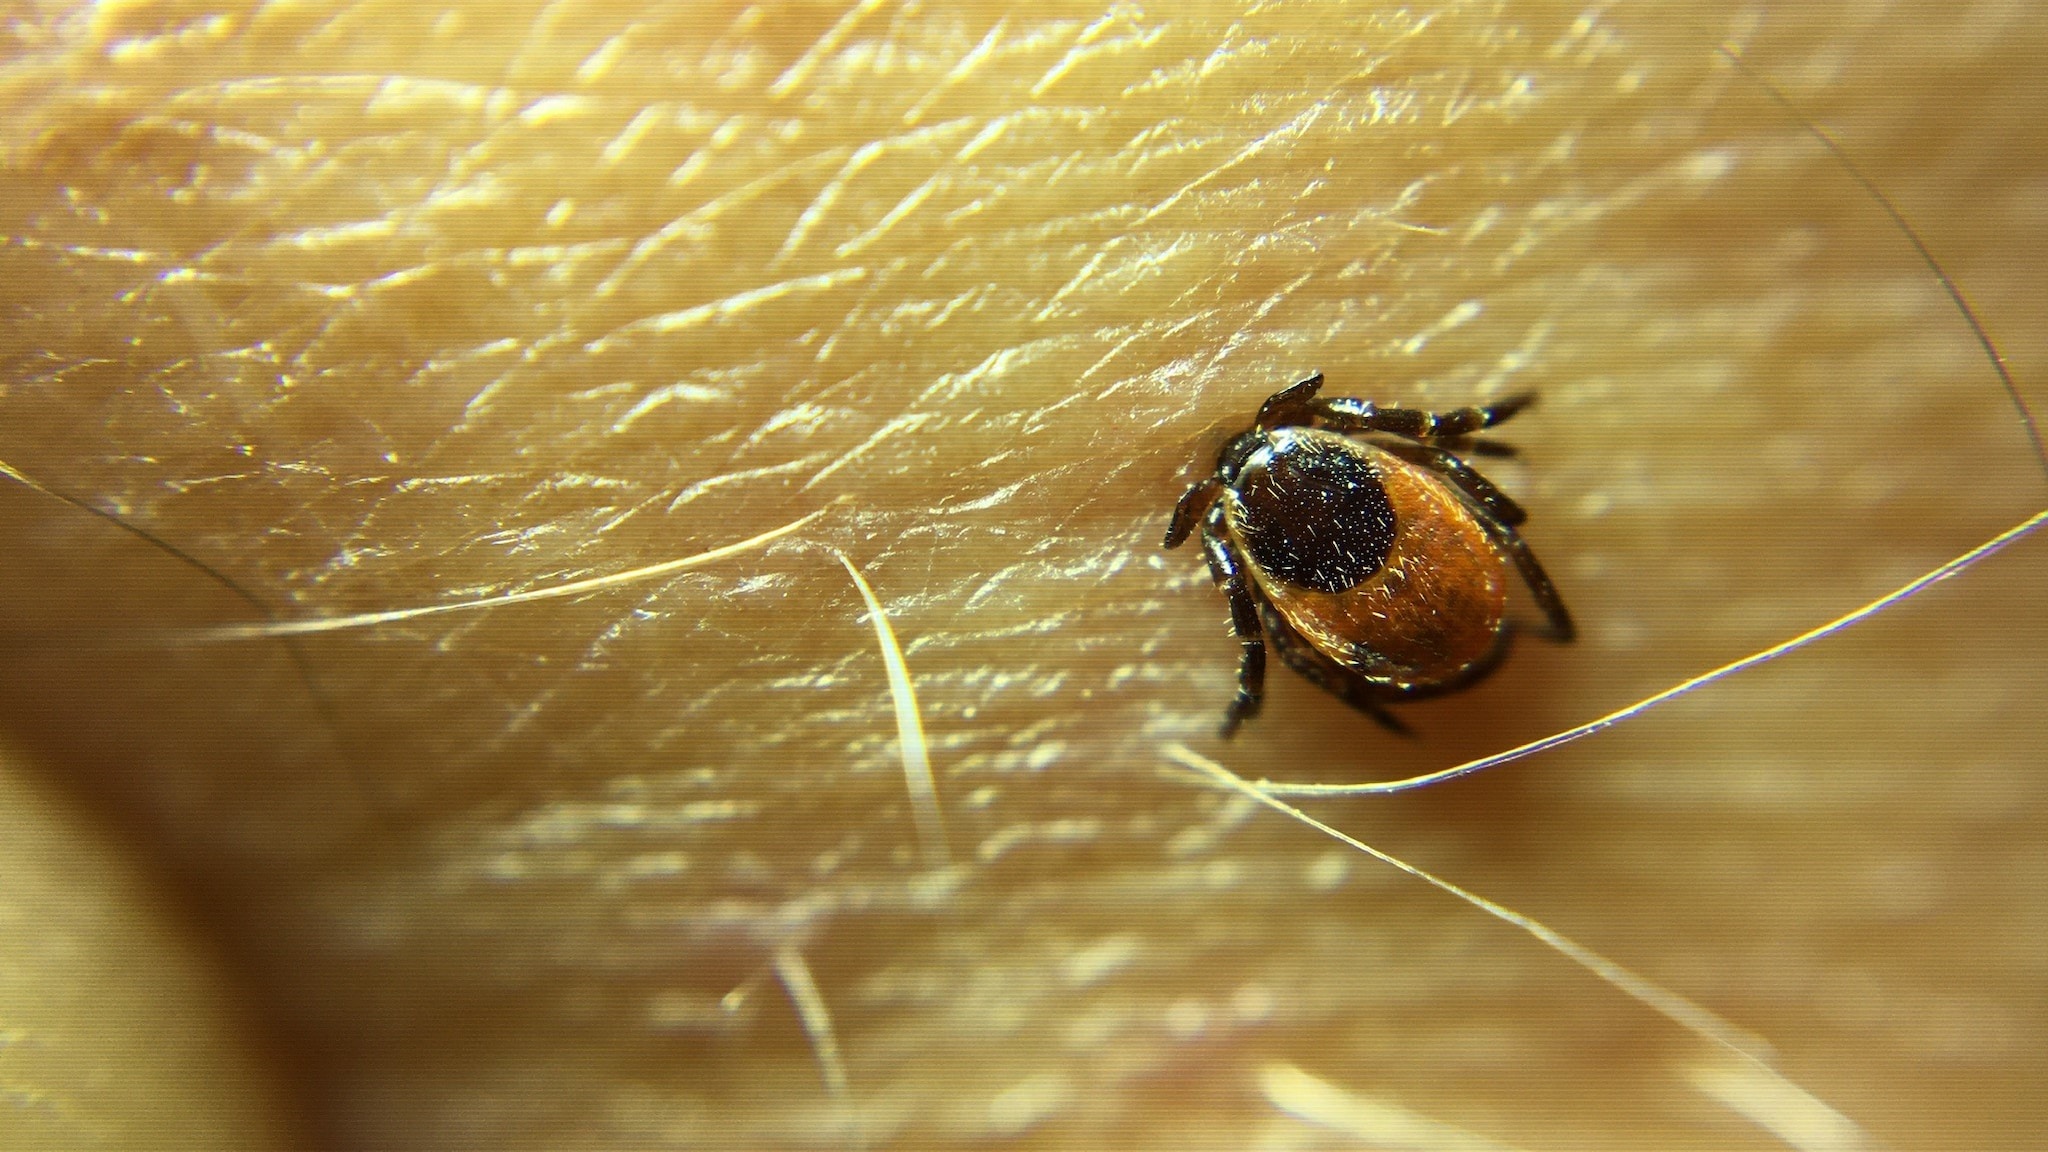 Blacklegged tick attached to skin